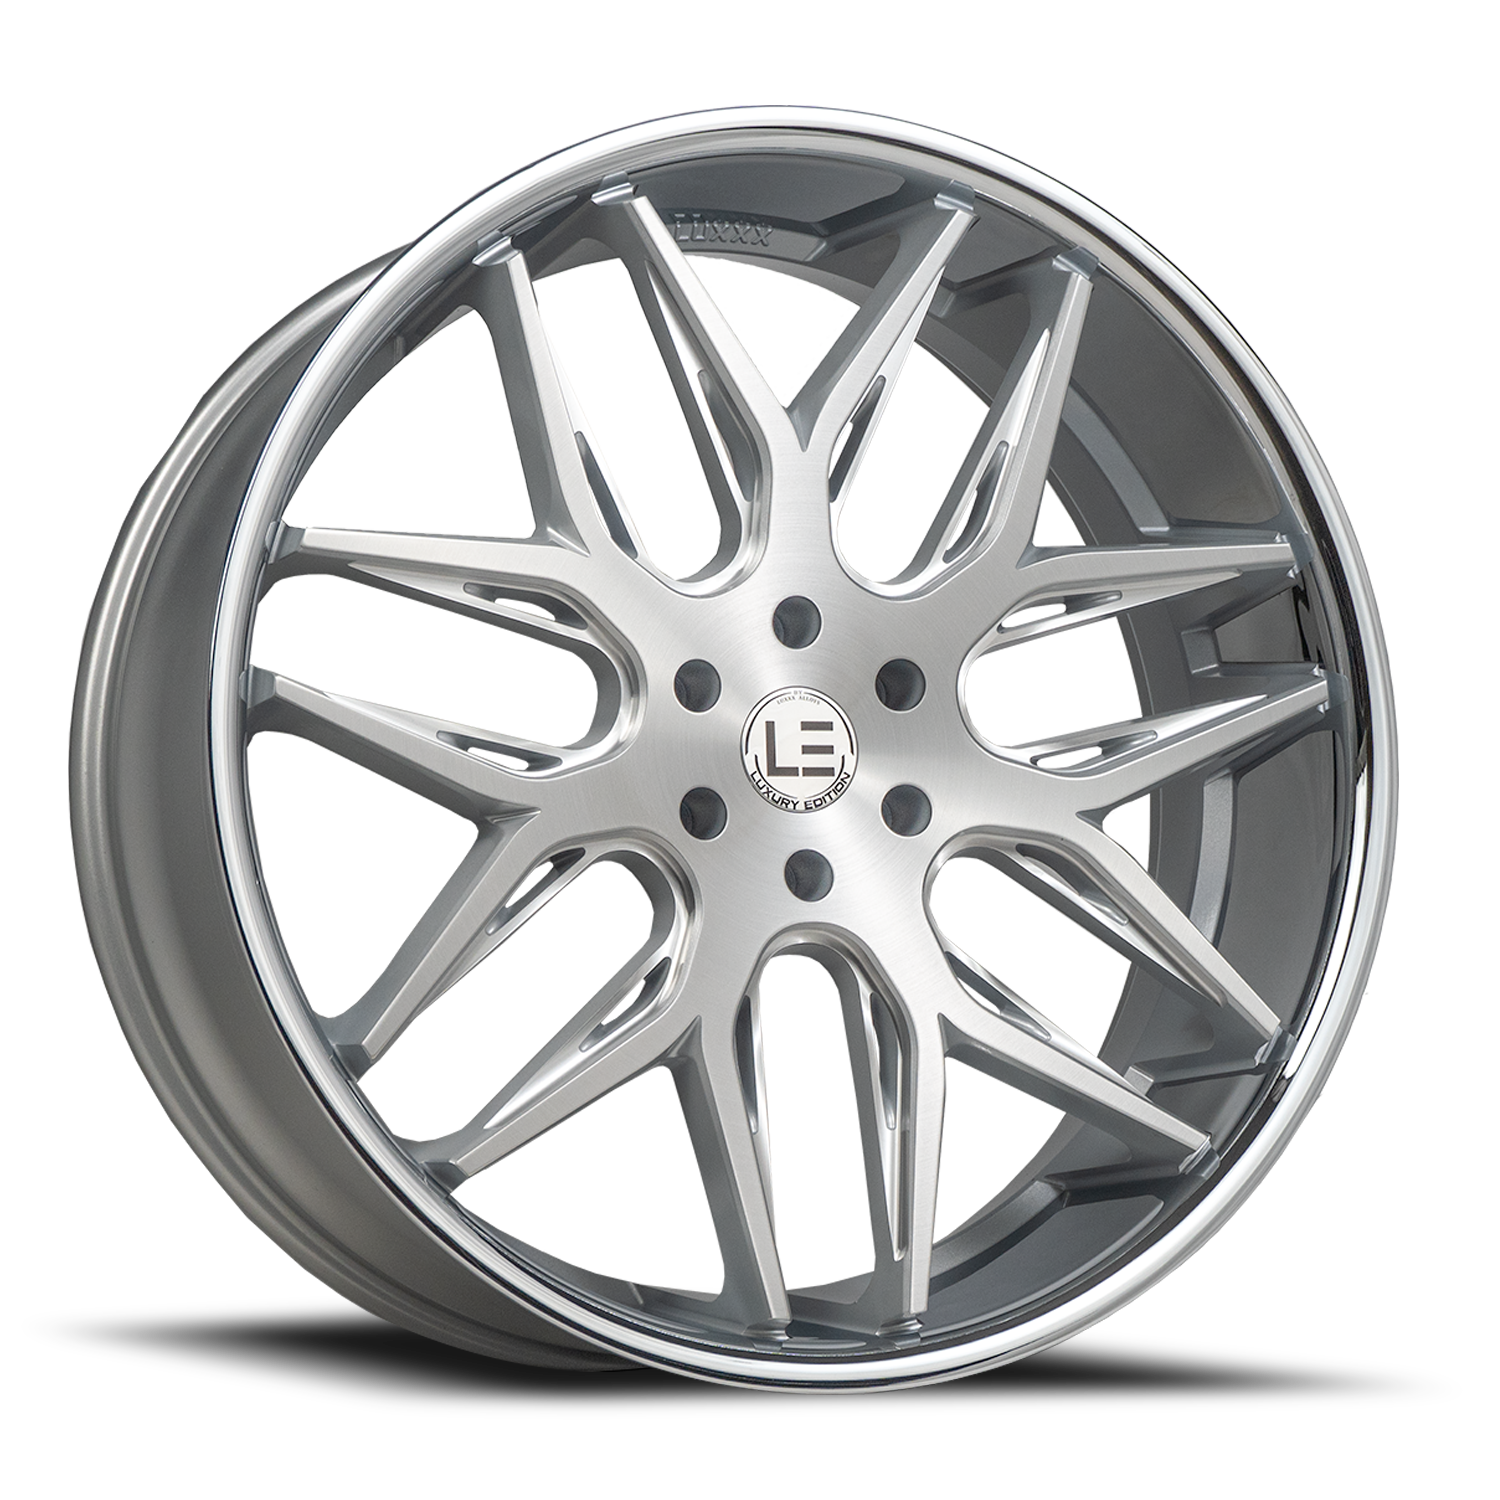 https://storage.googleapis.com/autosync-wheels/Luxxx_LE/14-SL_Brushed_Silver_Stainless-Steel-Lip-Milled_6-lug_0001.png